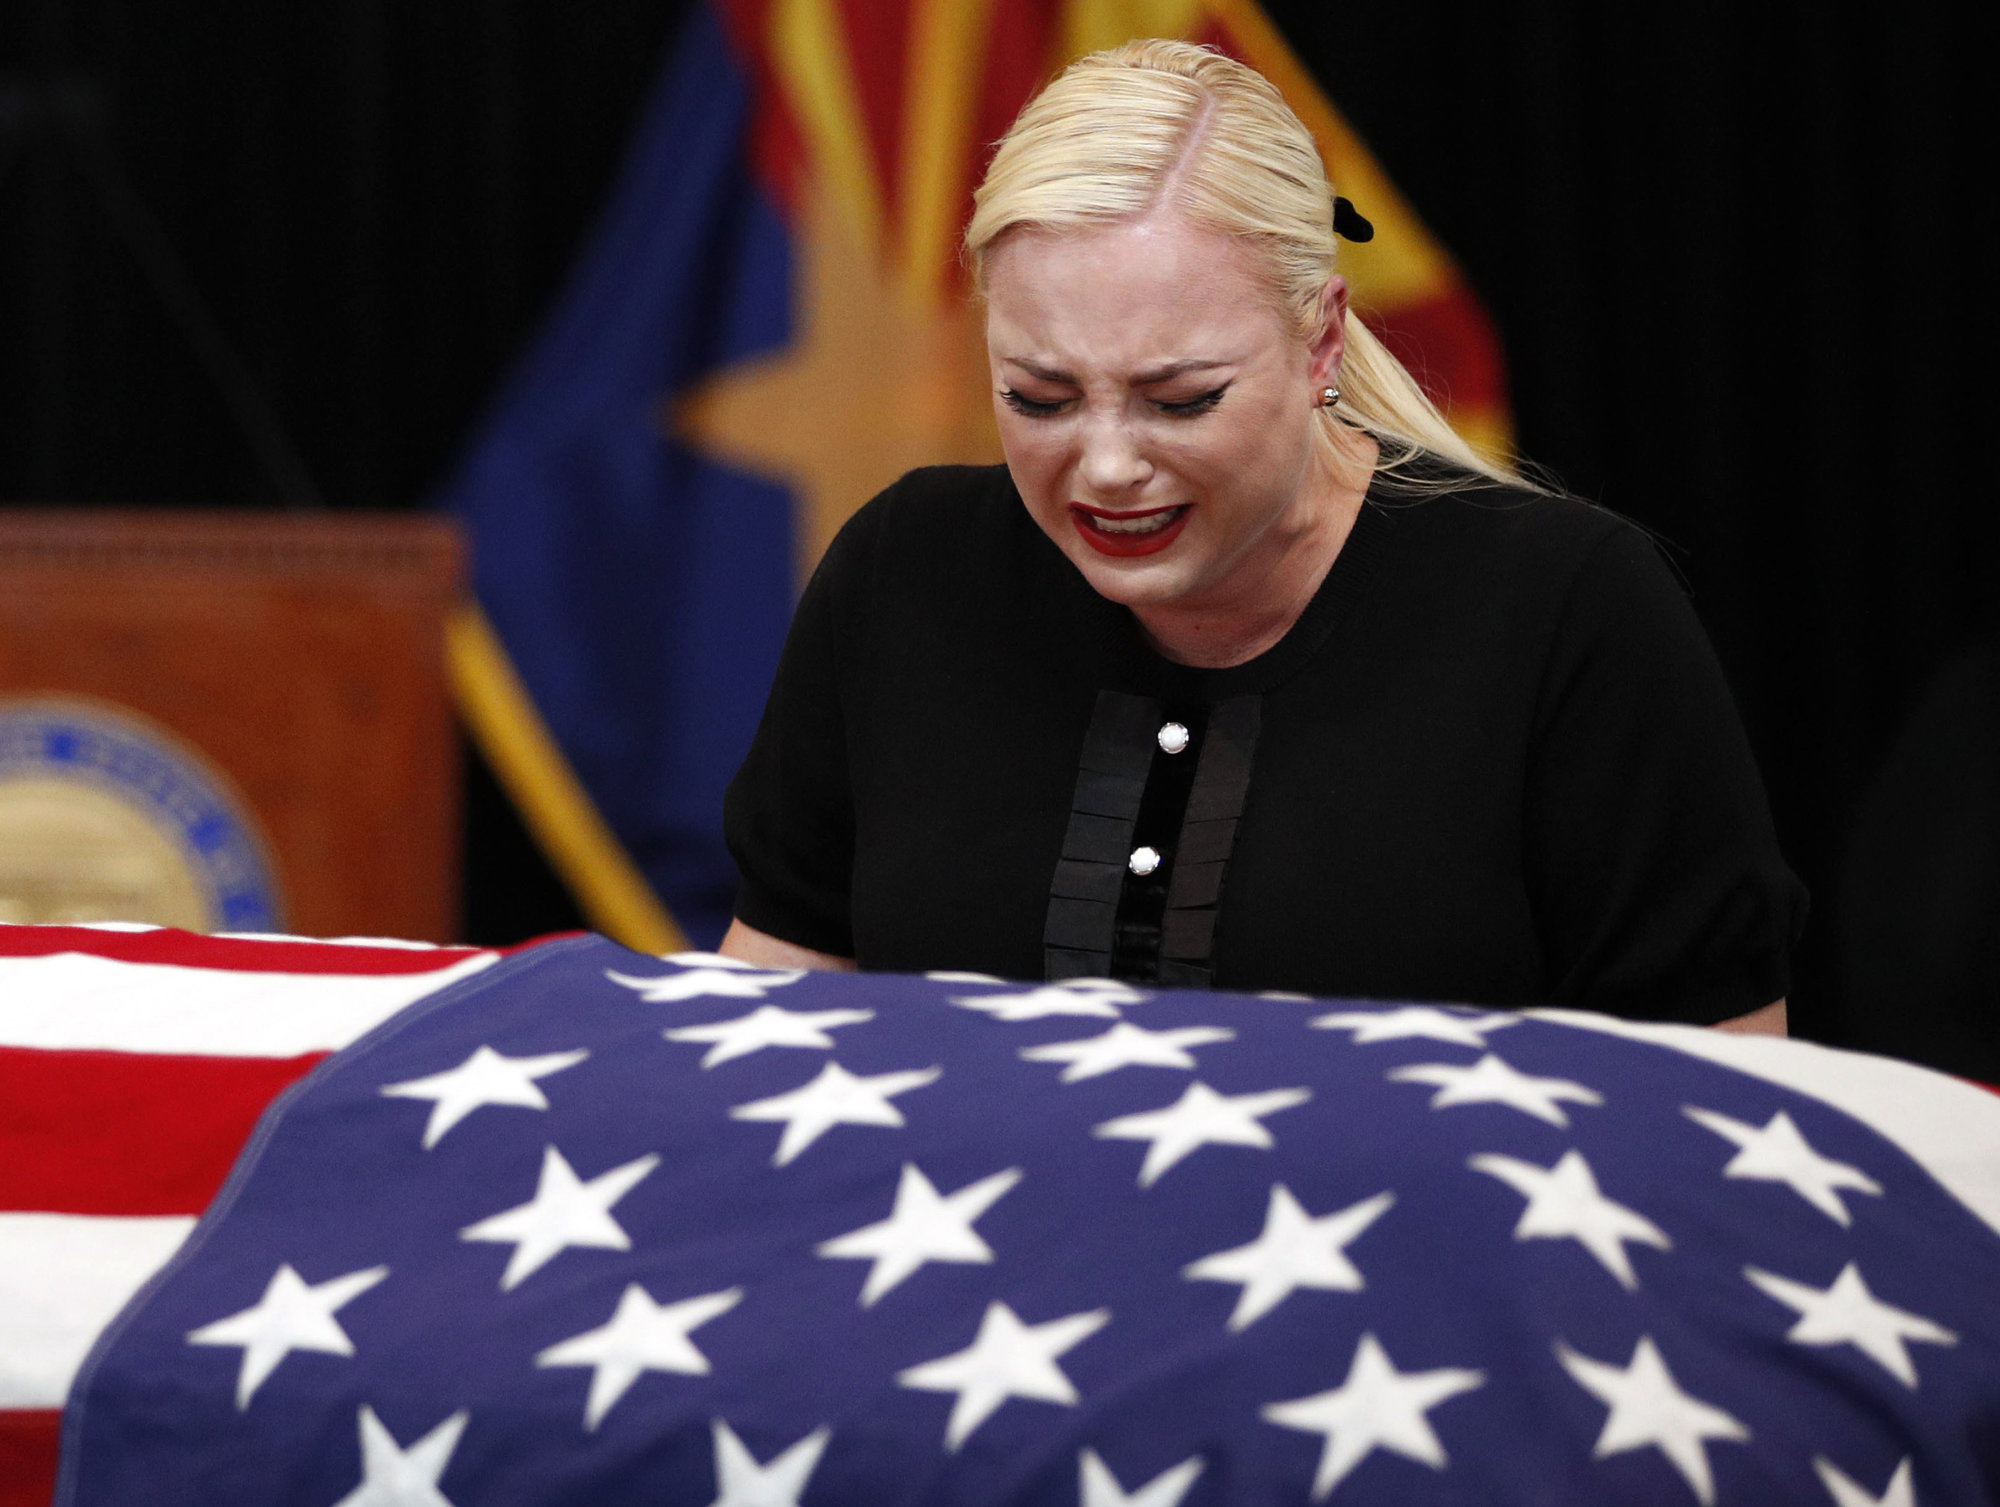 Meghan McCain, daughter of, Sen. John McCain, R-Ariz. cries at the casket of her father during a memorial service at the Arizona Capitol on Wednesday, Aug. 29, 2018, in Phoenix. (AP Photo/Jae C. Hong, Pool)